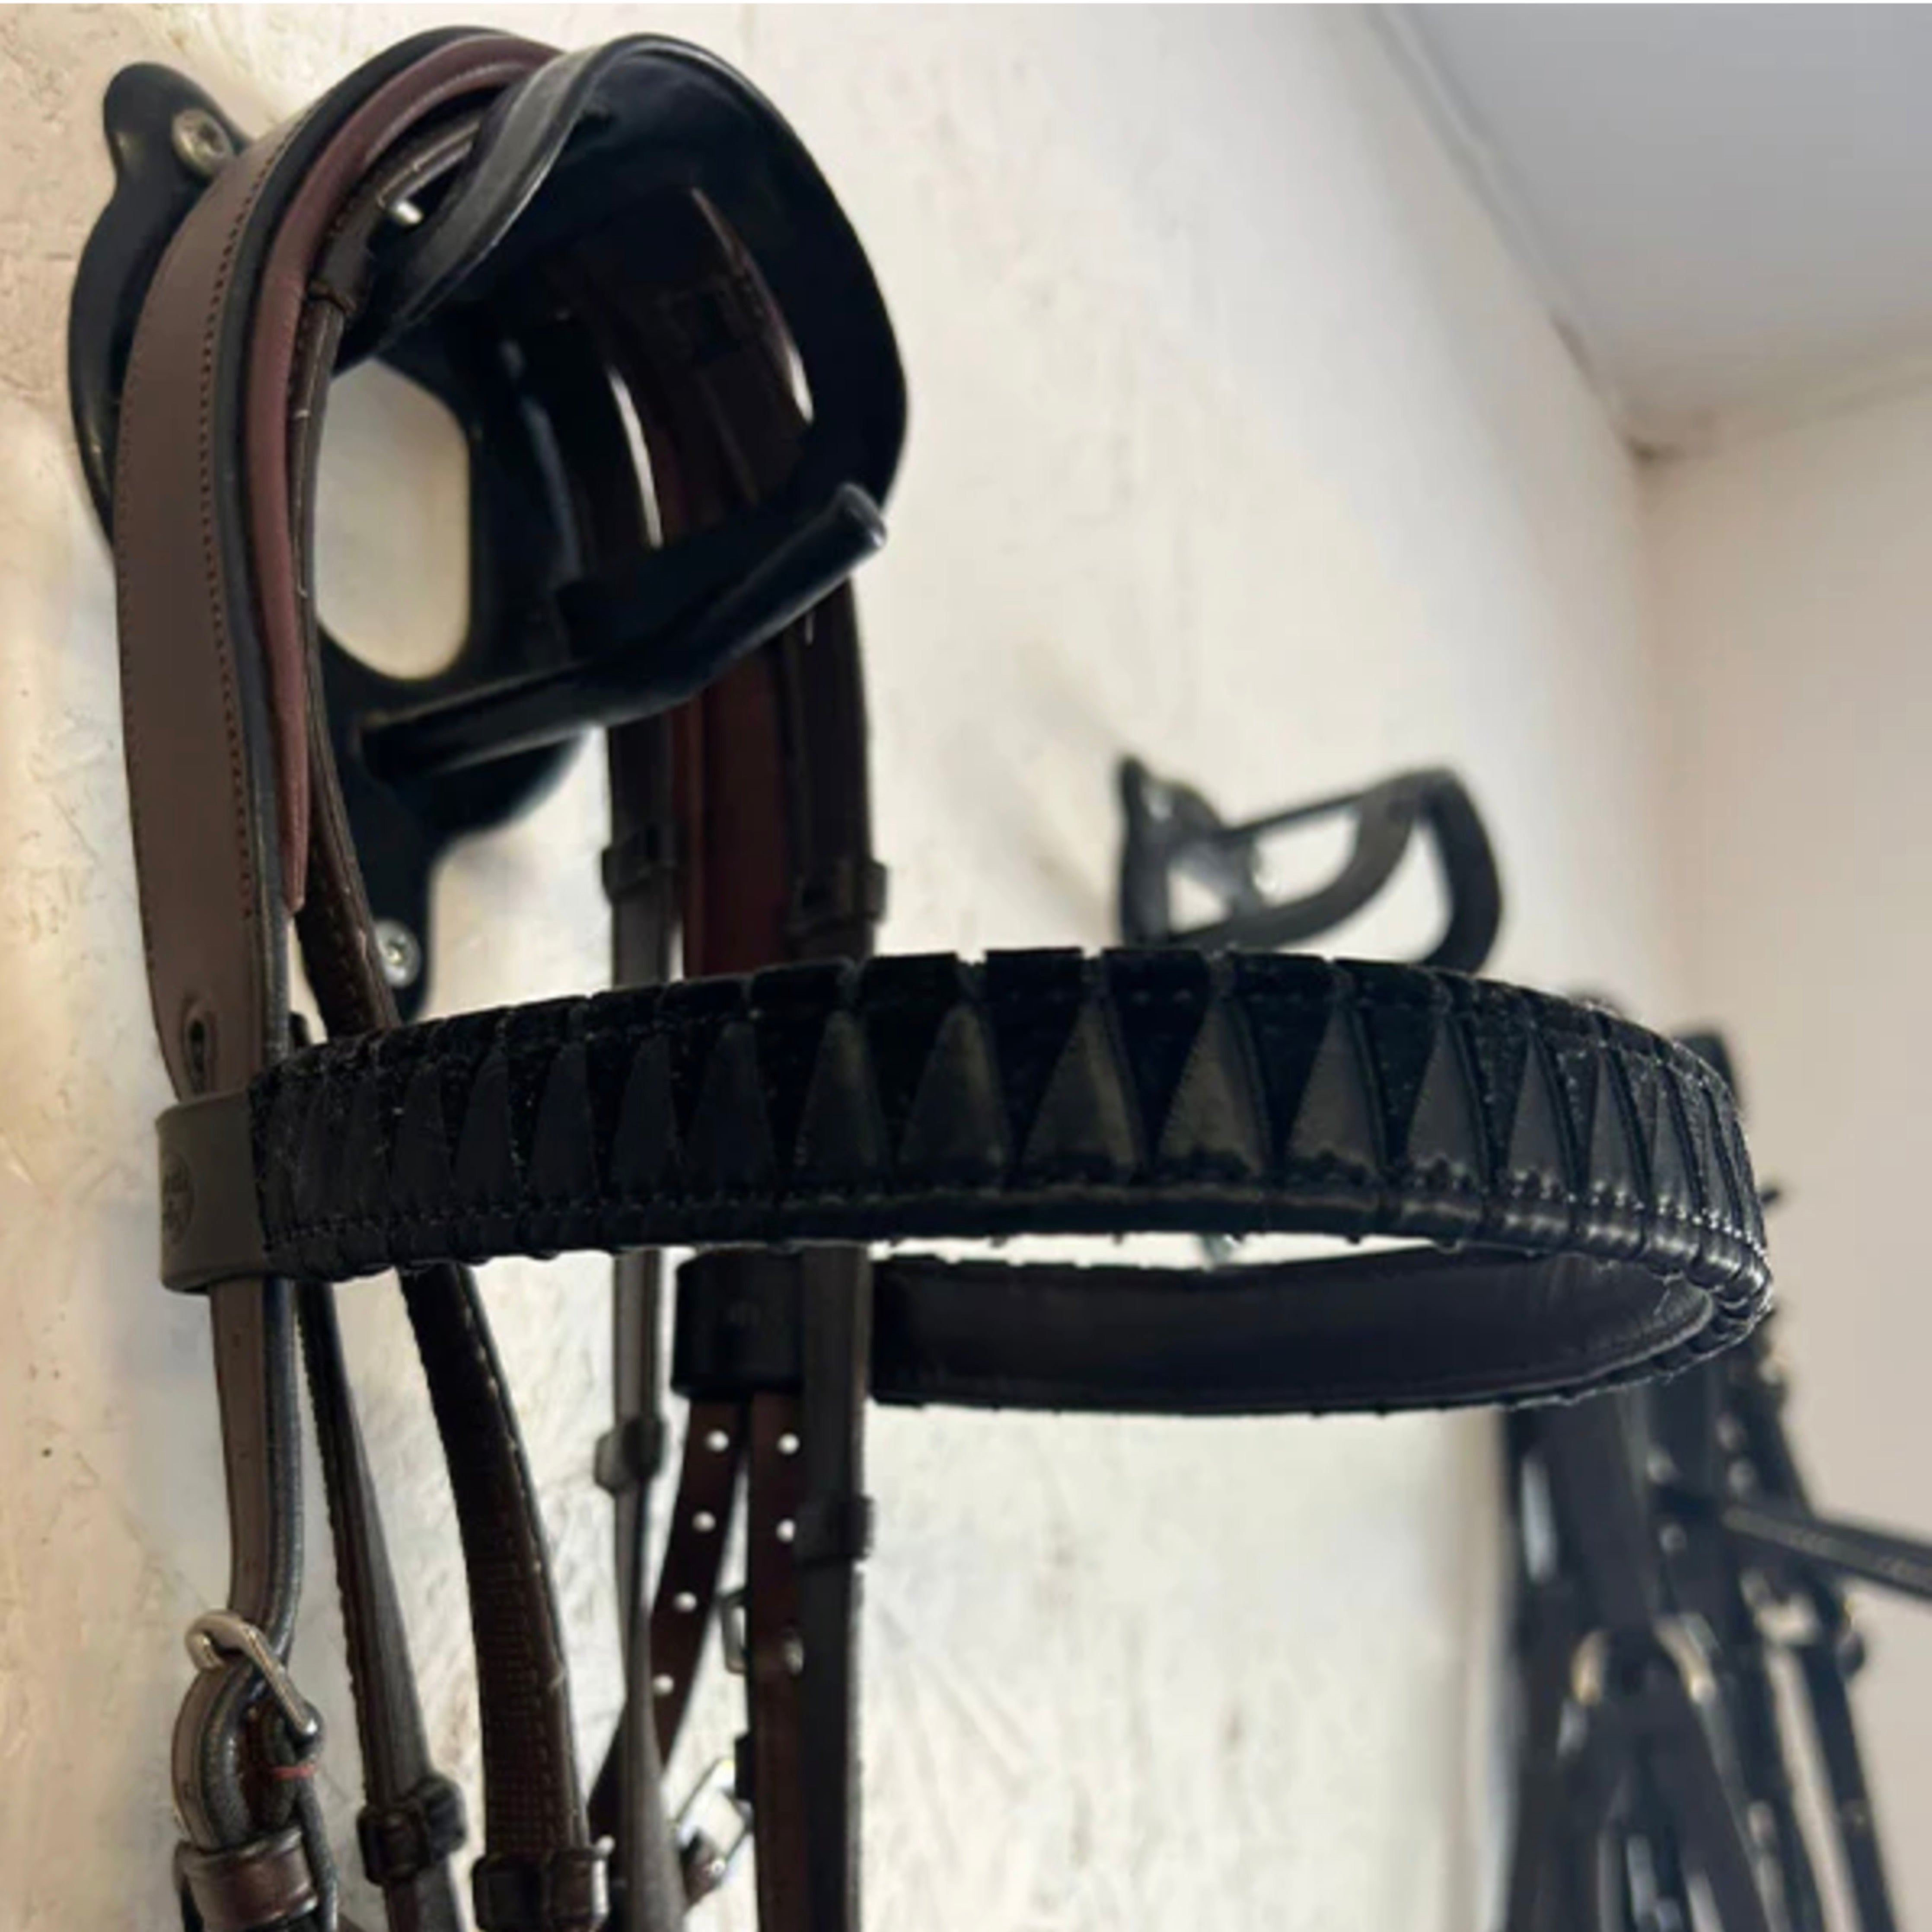 Get the Gallop Sharktooth Browband